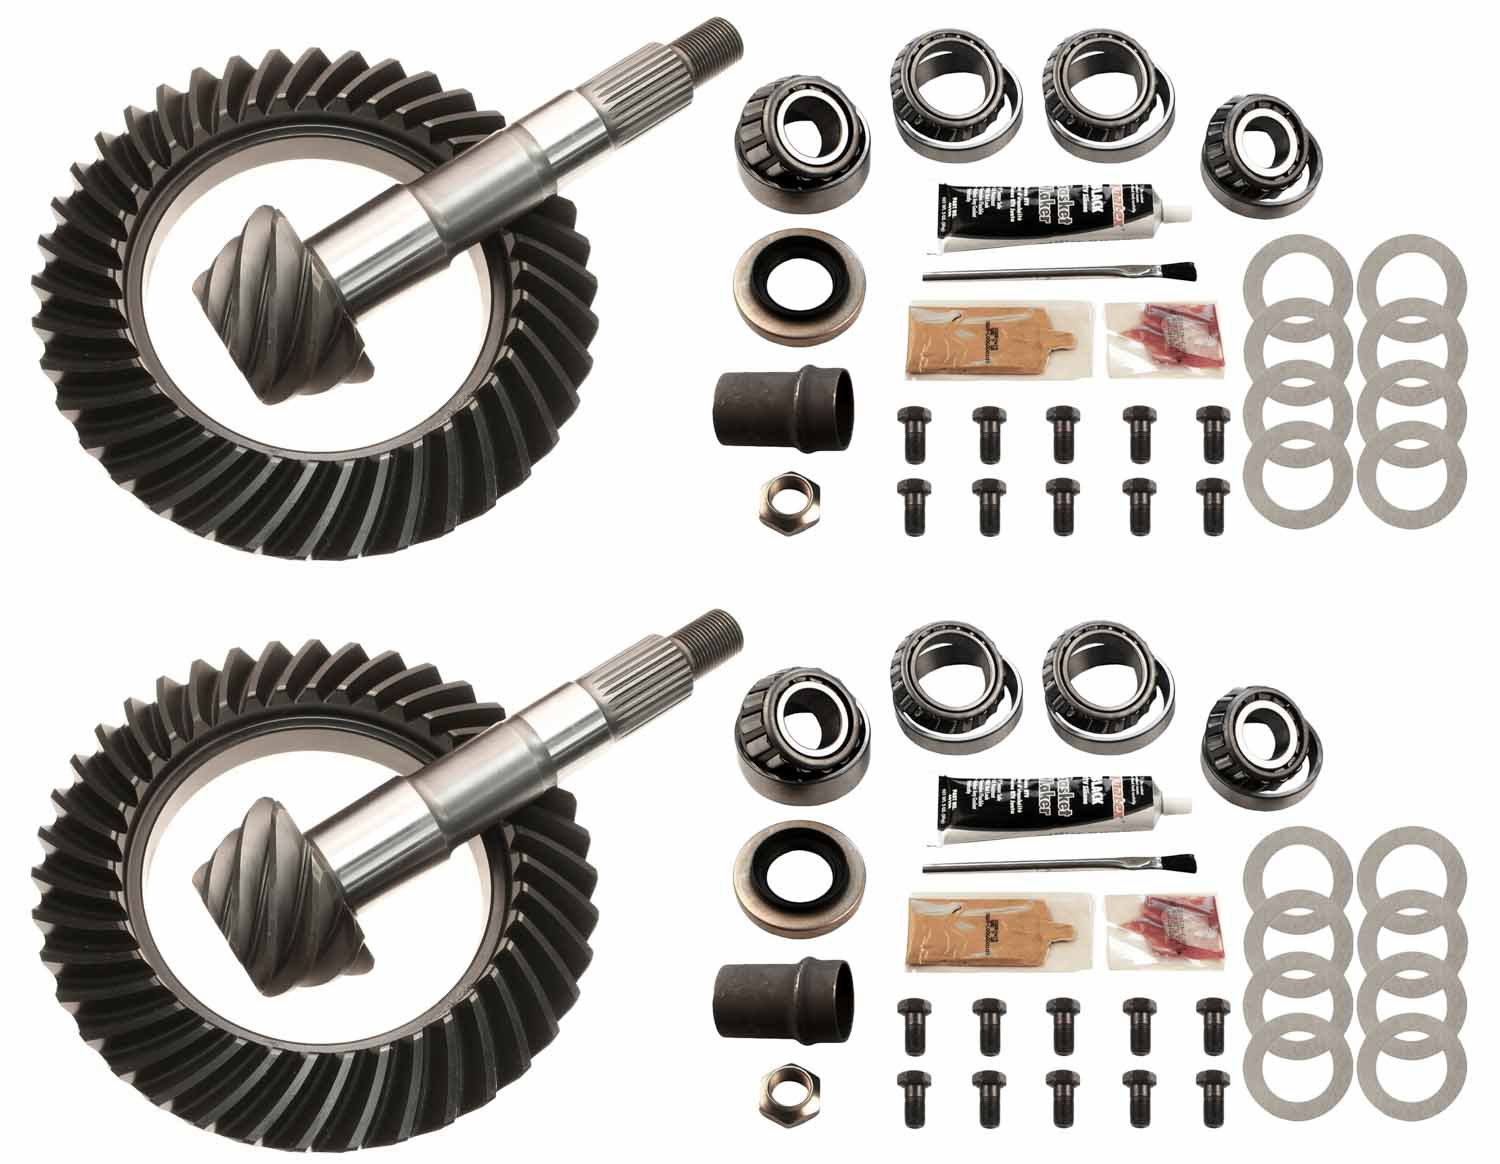 Complete Front and Rear Ring and Pinion Kit 1979-1985 Toyota Pickup 4-Cylinder, 1984-1985 Toyota 4Runner 4-Cylinder - 4.11 Ratio